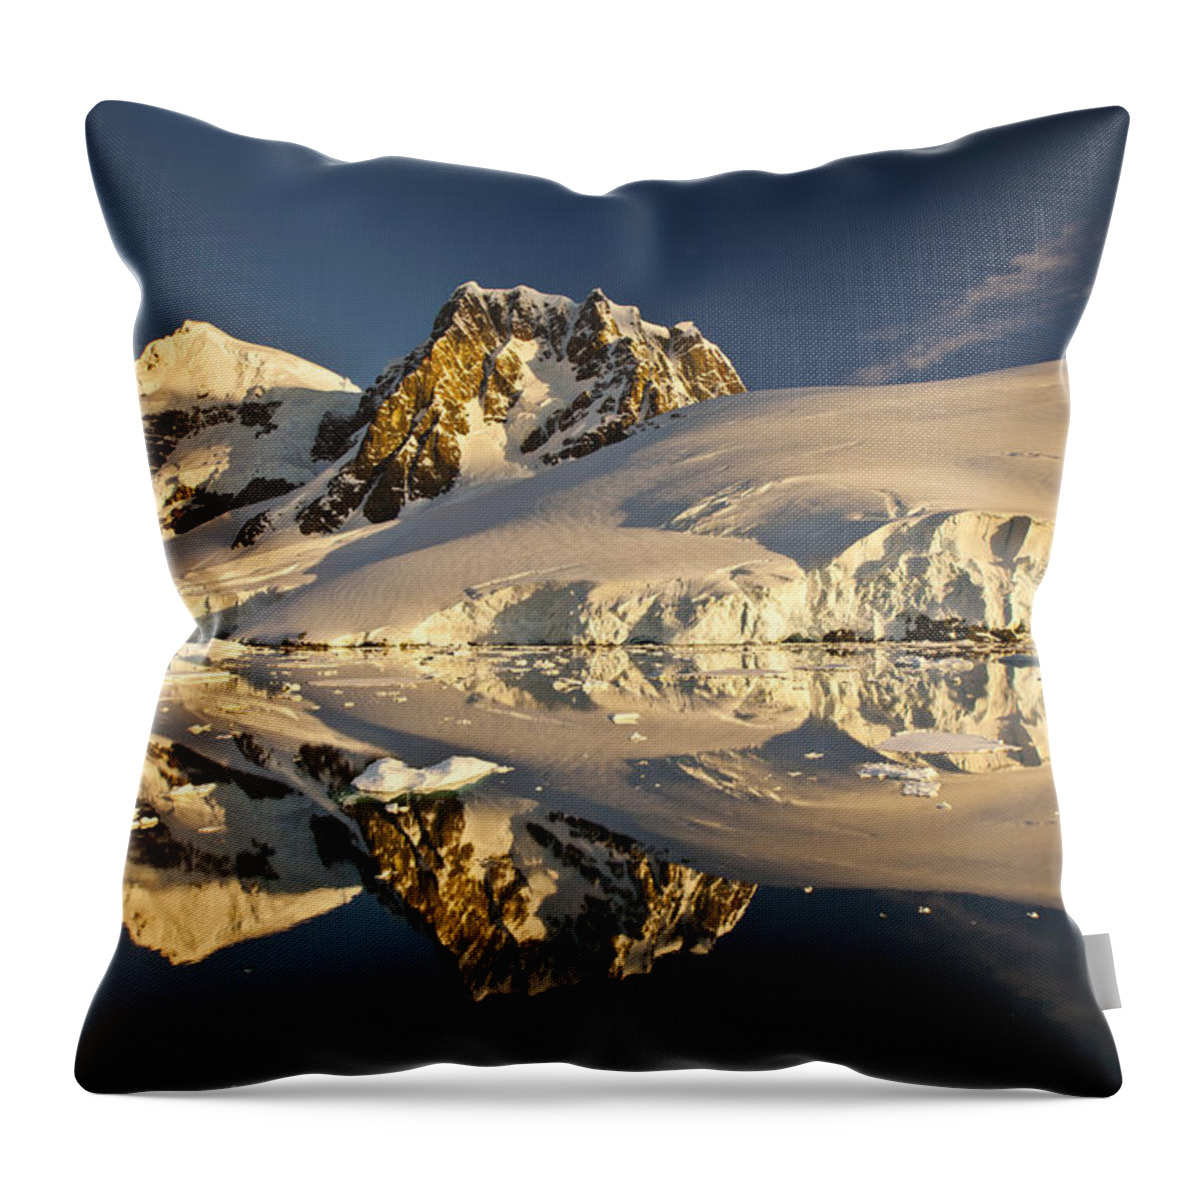 00451380 Throw Pillow featuring the photograph Lemaire Channel At Sunset Antarctic by Colin Monteath